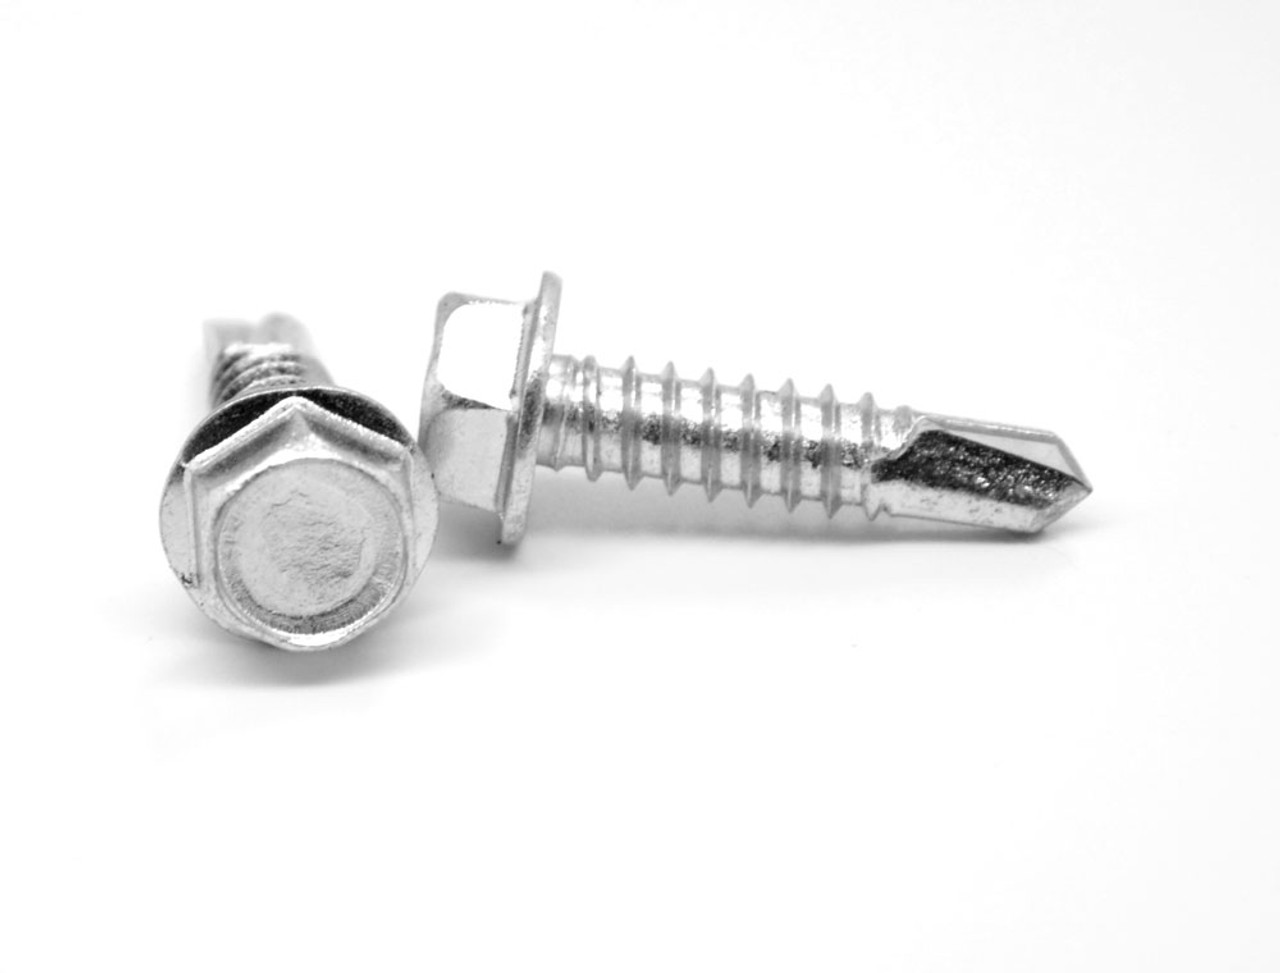 #7-19 x 3/4" (FT) Self Drilling Screw Hex Washer Head #2 Point Stainless Steel 410